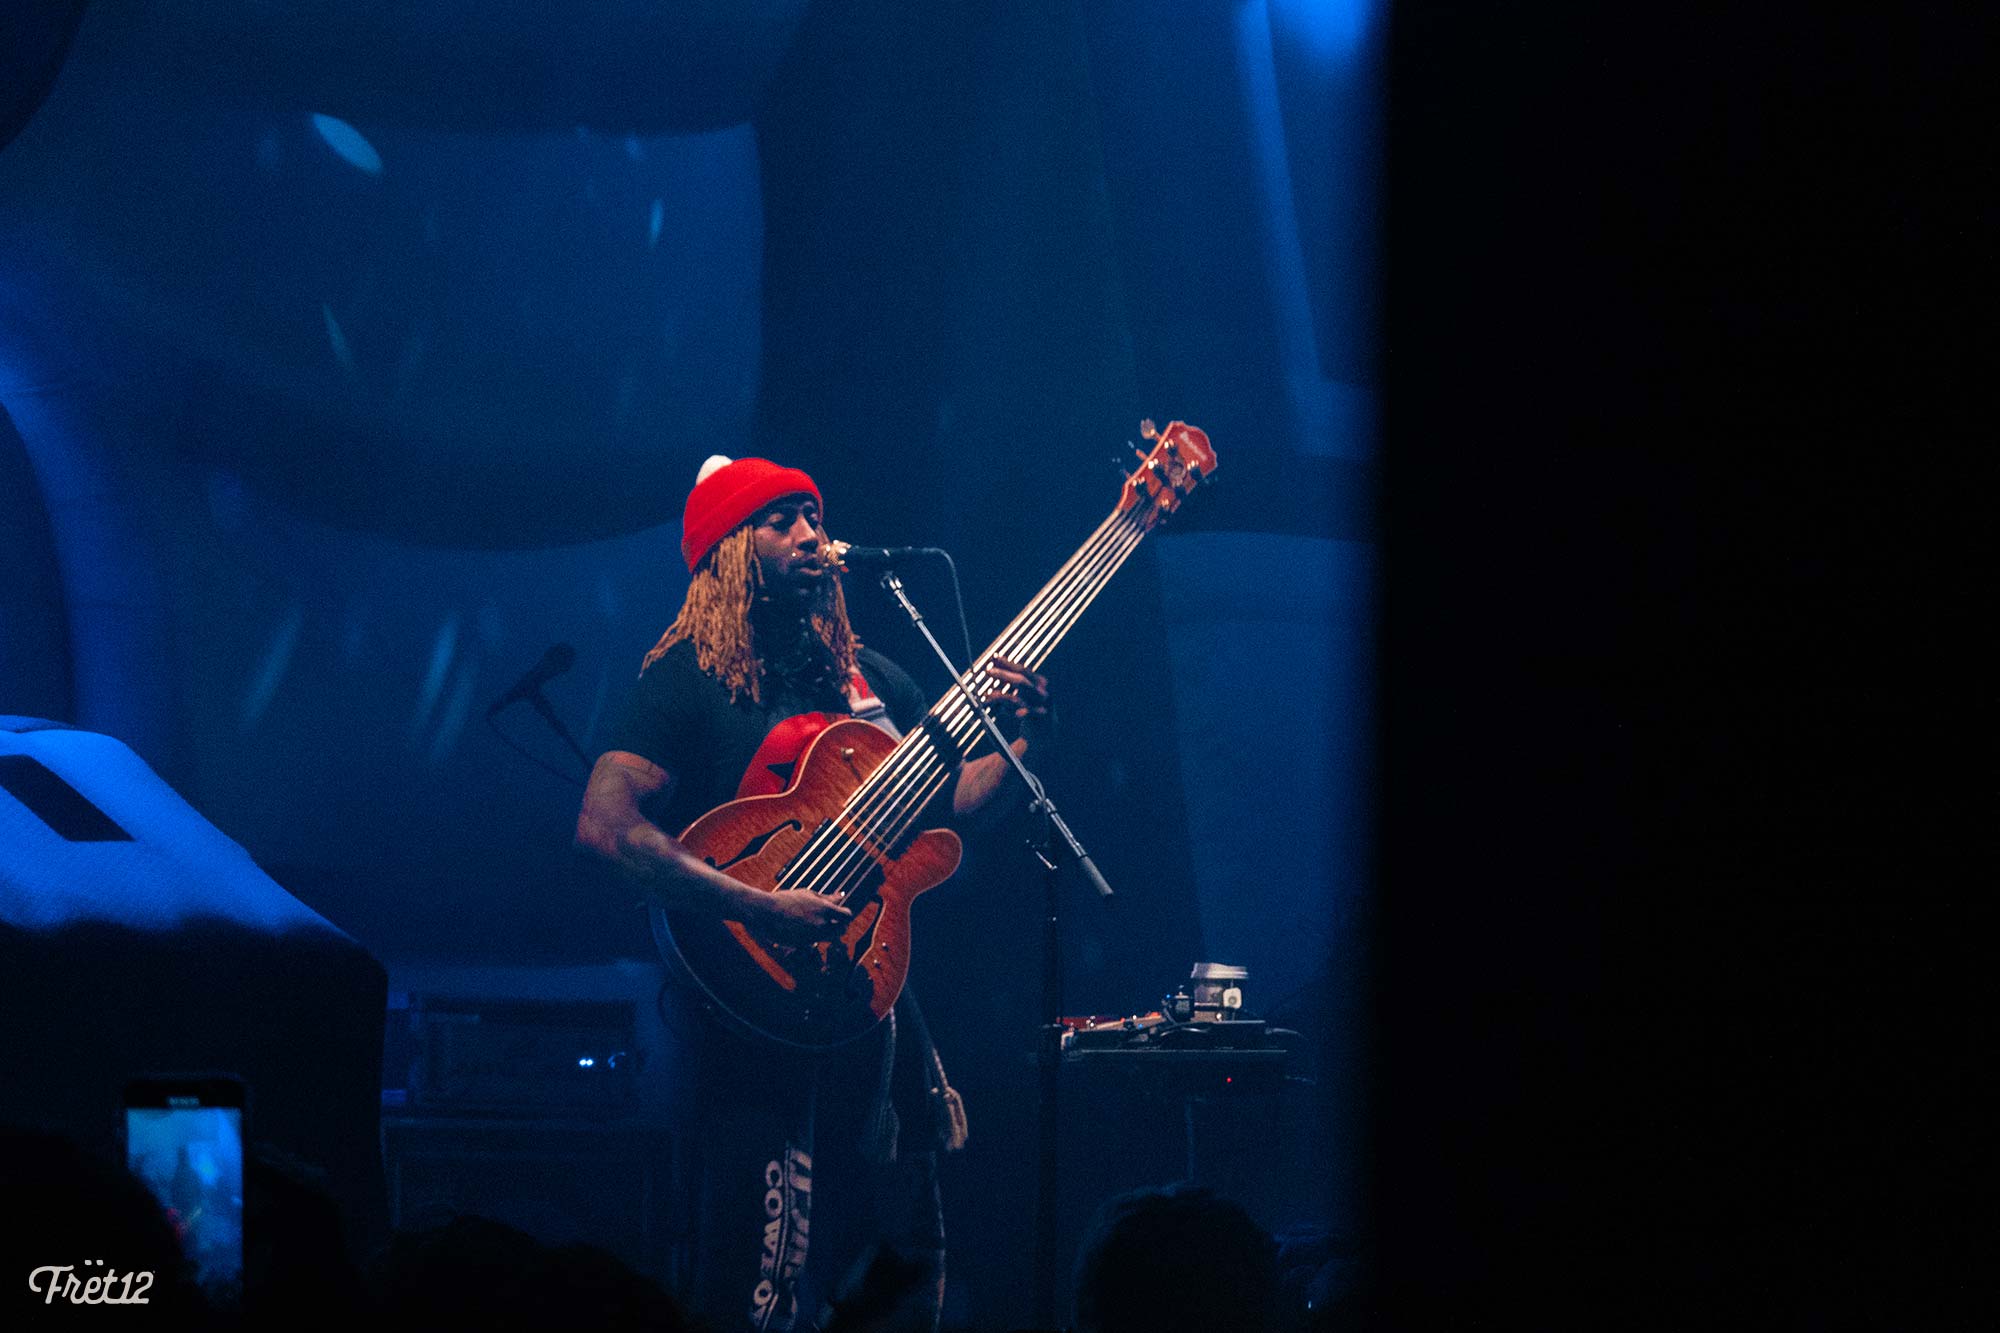 Thundercat at The Salt Shed - Photos by FRET12